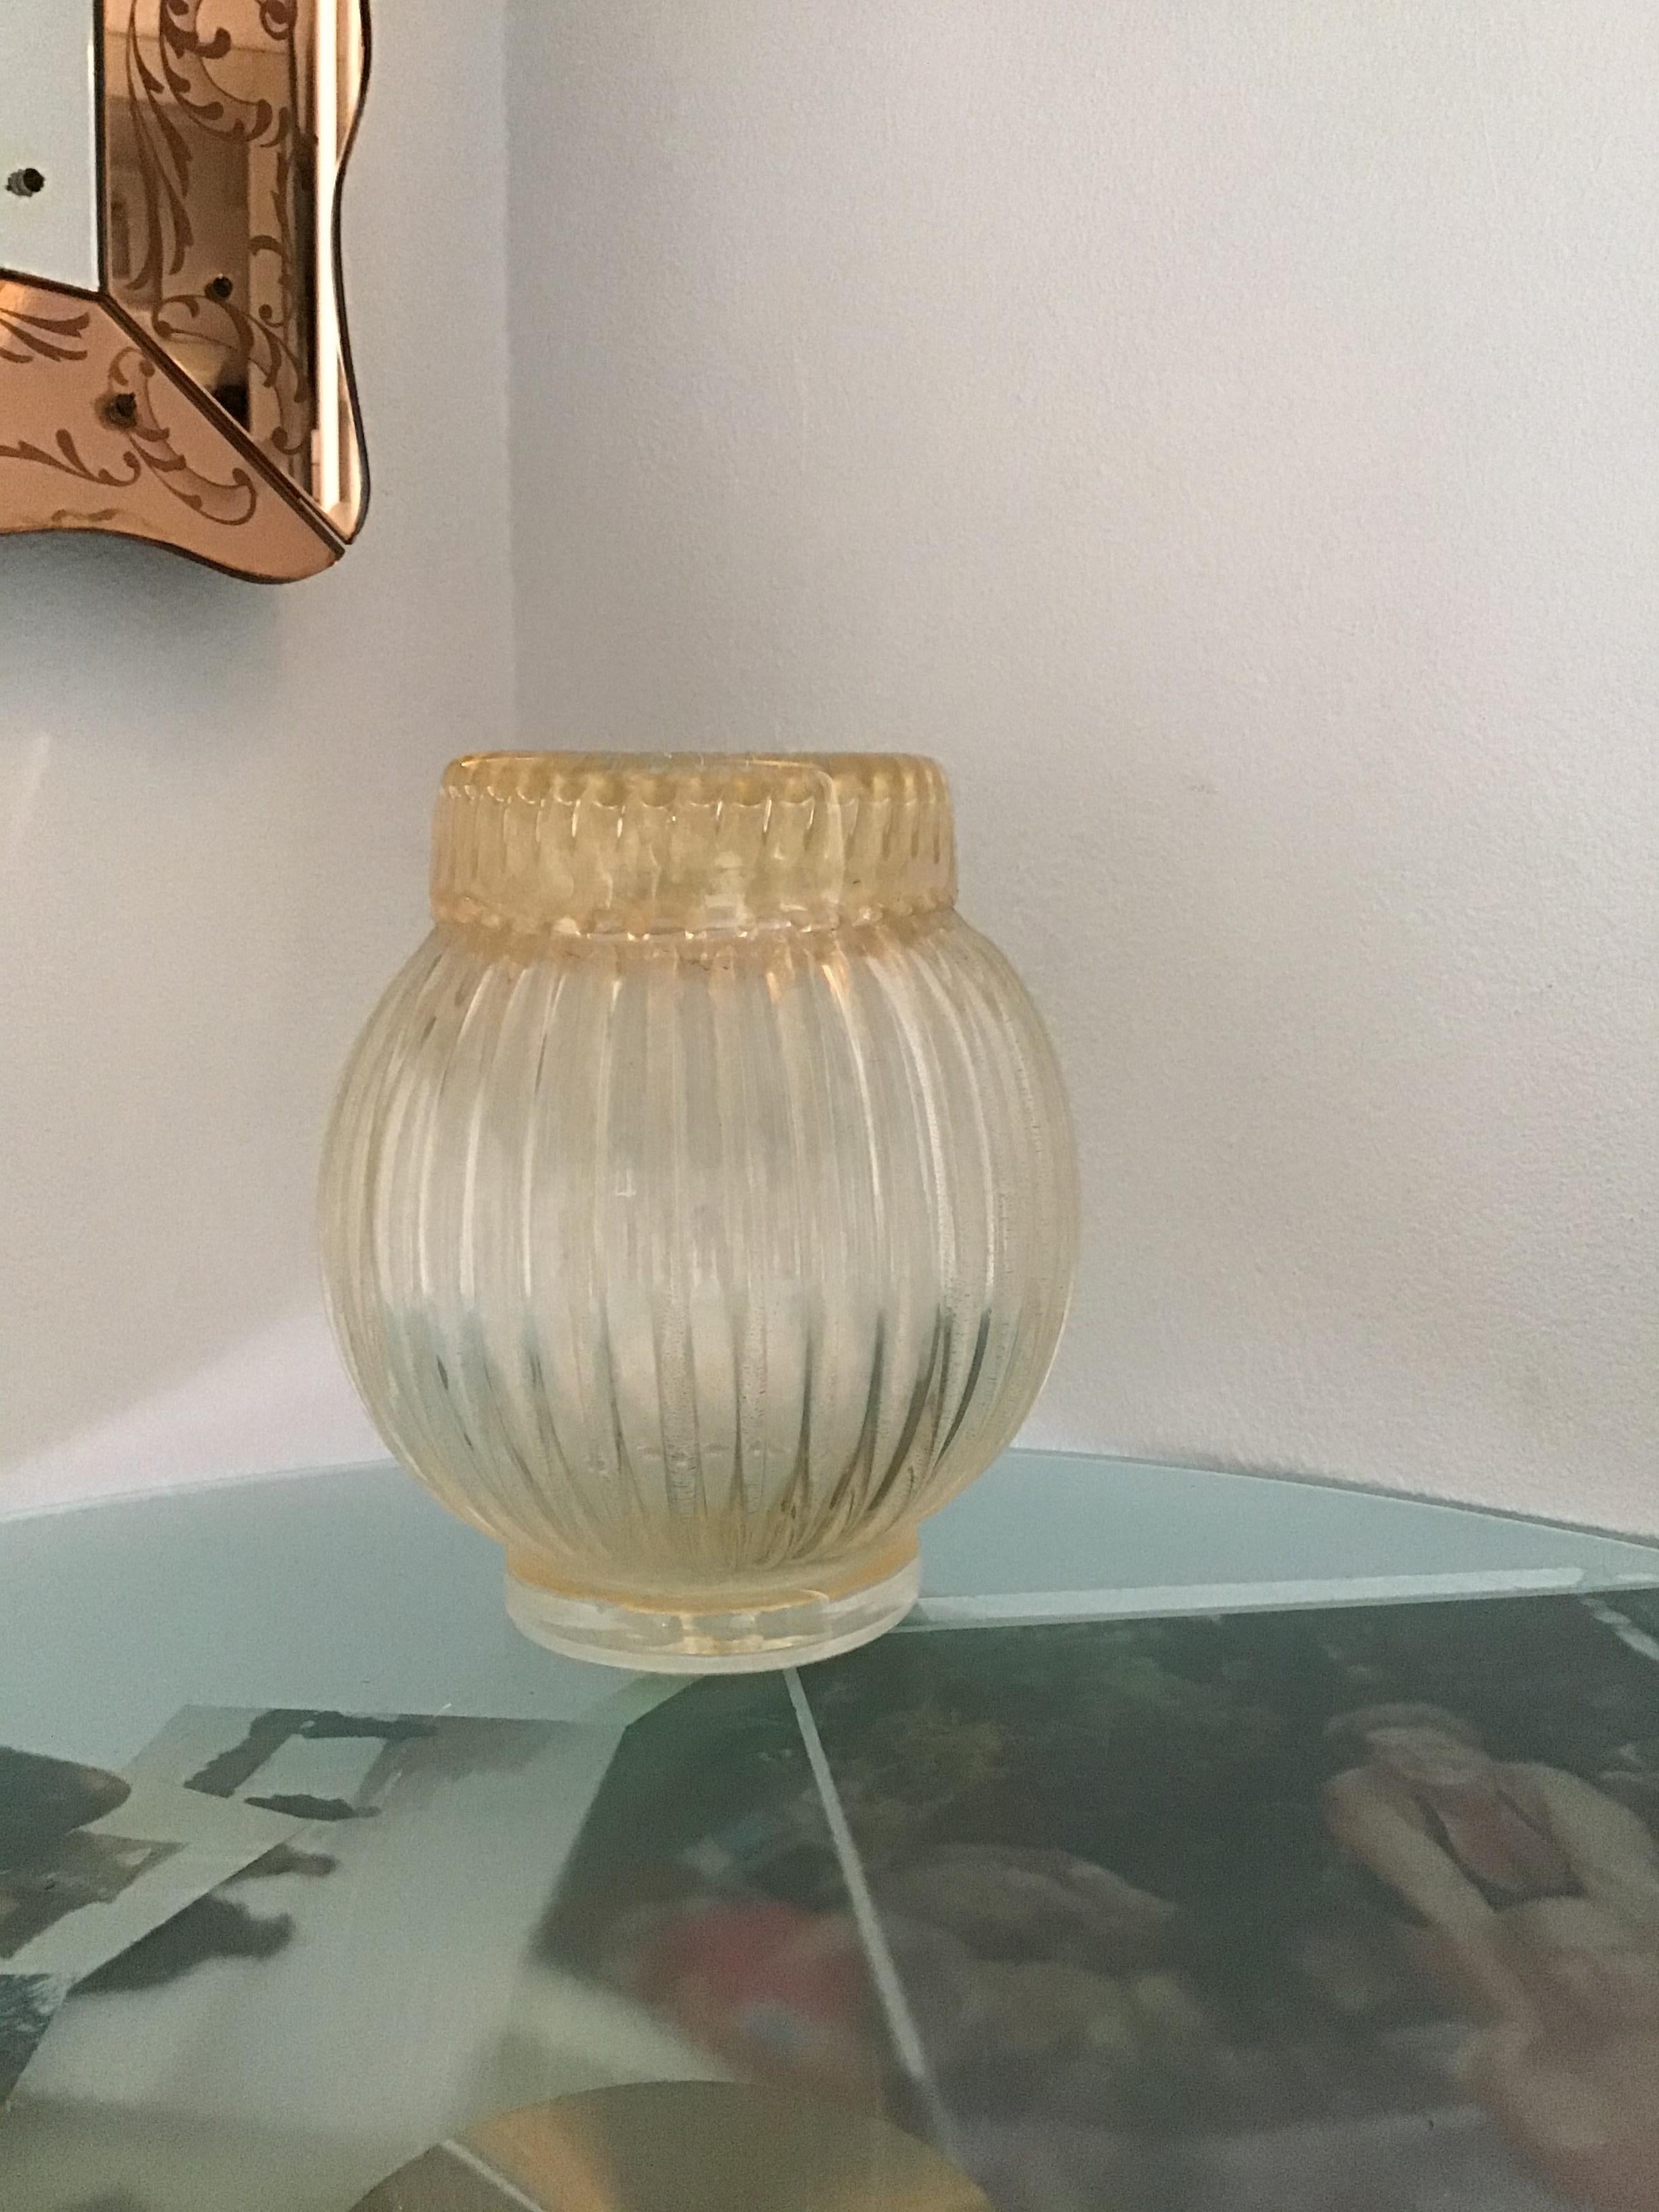 Mid-20th Century Seguso Vase Murano Glass with Gold Leaf 1955 Italy For Sale